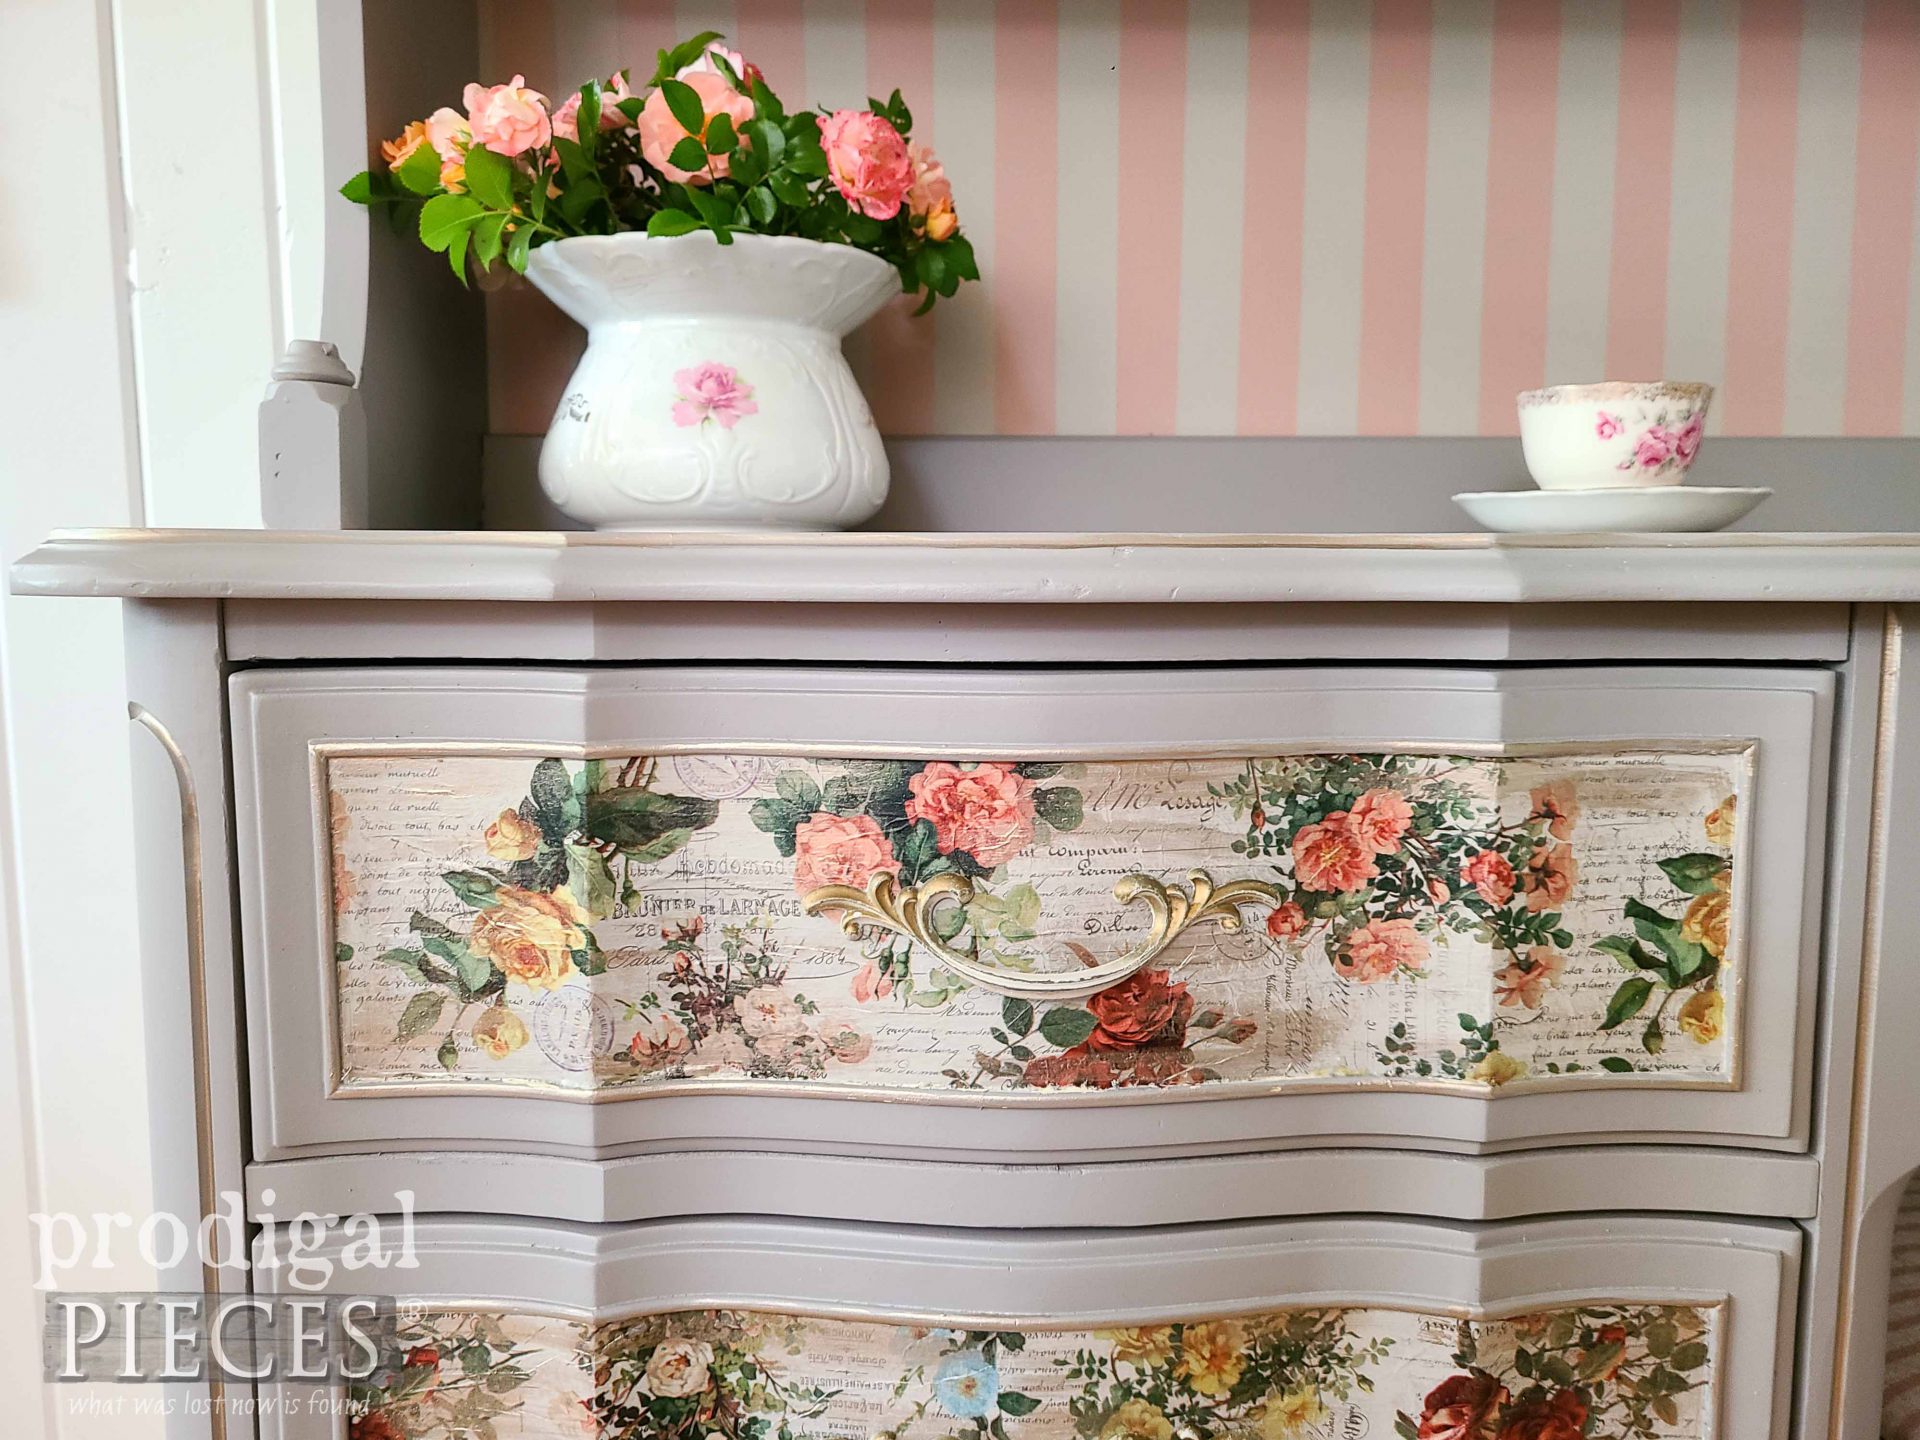 DIY Rose Decoupage on Desk Drawer Fronts by Larissa of Prodigal Pieces | prodigalpieces.com #prodigalpieces #diy #decoupage